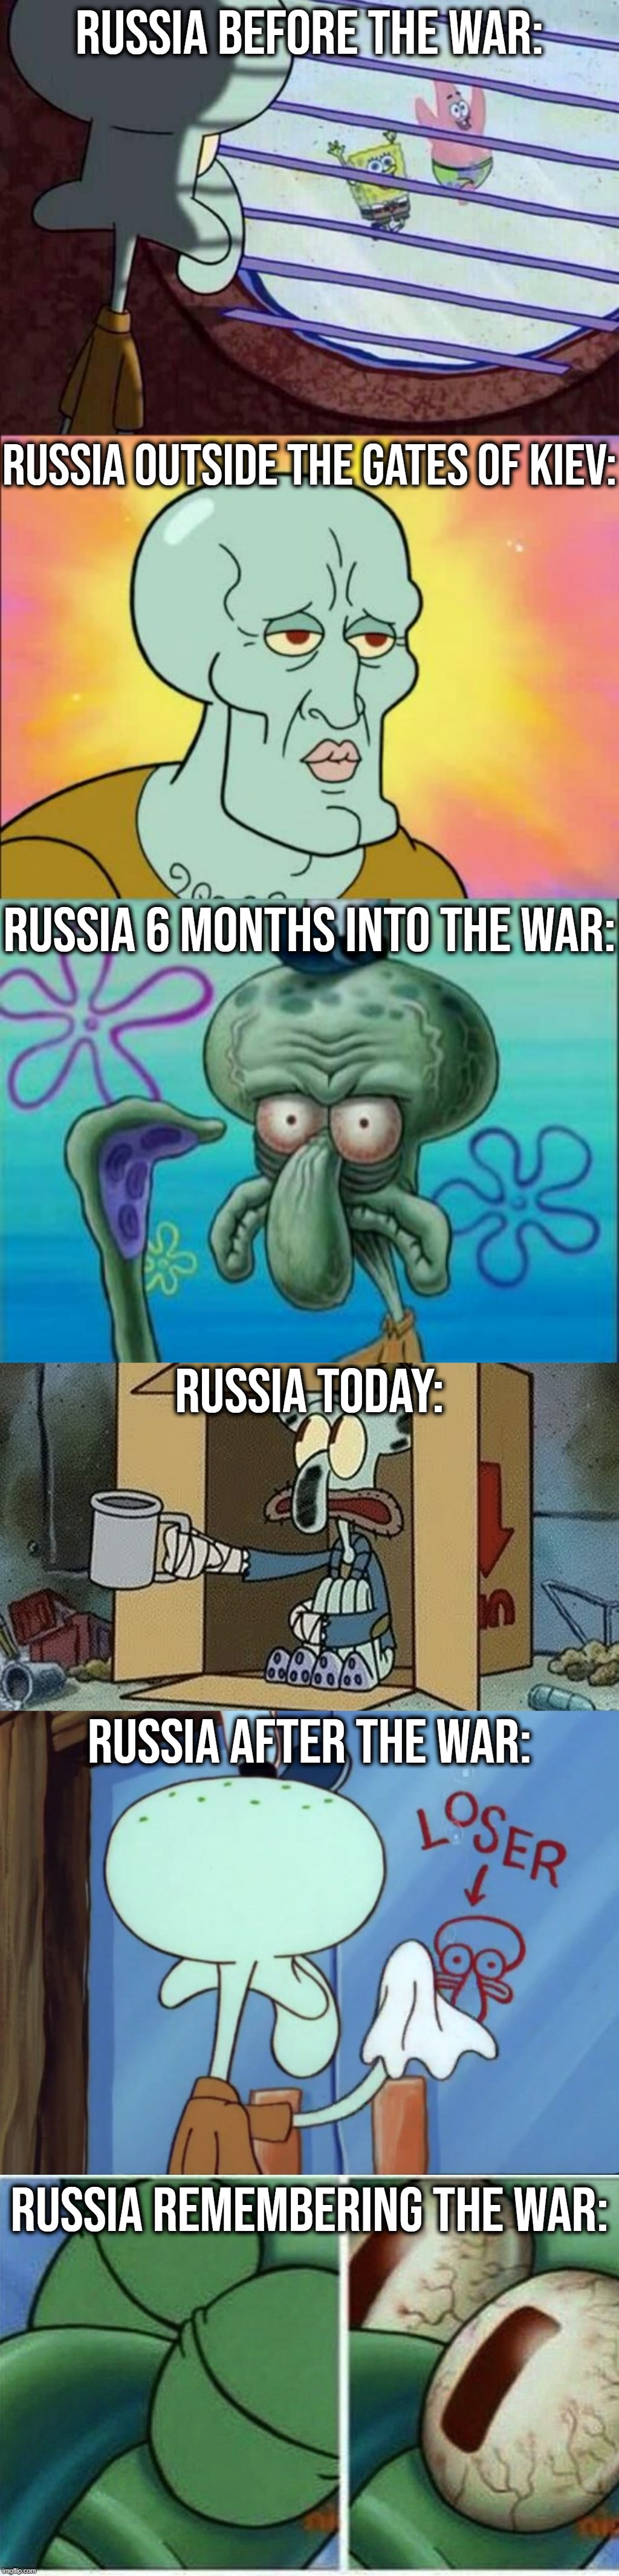 The Russo-Ukrainian War: A Story Told in Squidward | RUSSIA BEFORE THE WAR:; RUSSIA OUTSIDE THE GATES OF KIEV:; RUSSIA 6 MONTHS INTO THE WAR:; RUSSIA TODAY:; RUSSIA AFTER THE WAR:; RUSSIA REMEMBERING THE WAR: | image tagged in squidward window,memes,squidward,squidward spare change,squidward cleaning loser | made w/ Imgflip meme maker